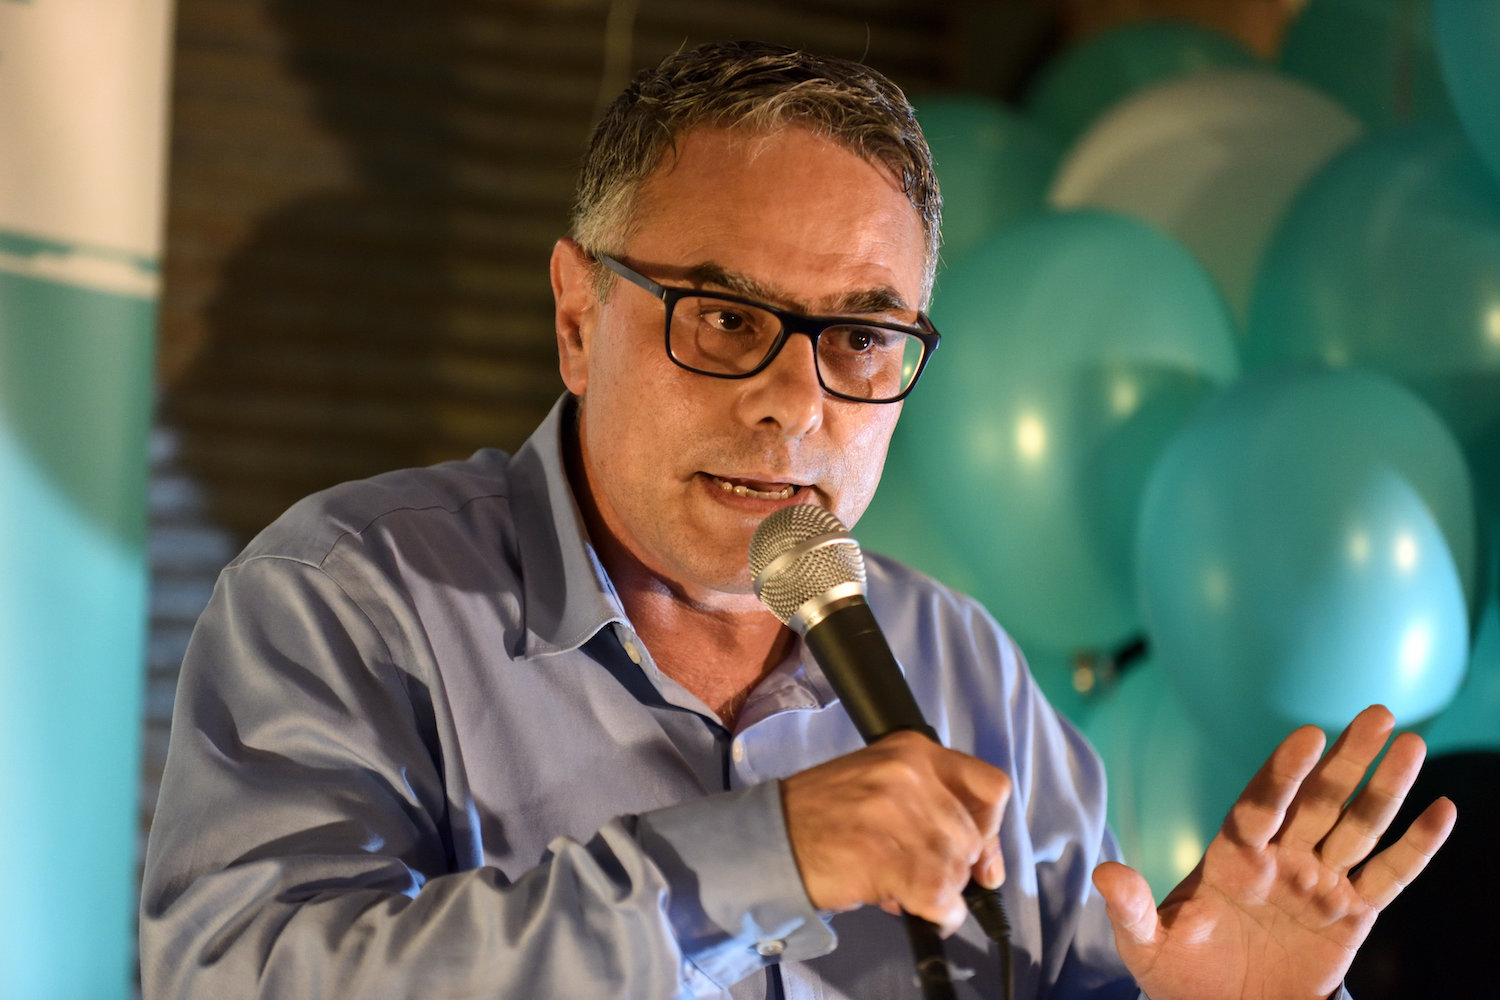 MK Mtanes Shehadeh who heads Balad, one of the parties that make up the Joint List, speaks at an election campaign event in Tel Aviv, August 20, 2019. (Gili Yaari/Flash90)